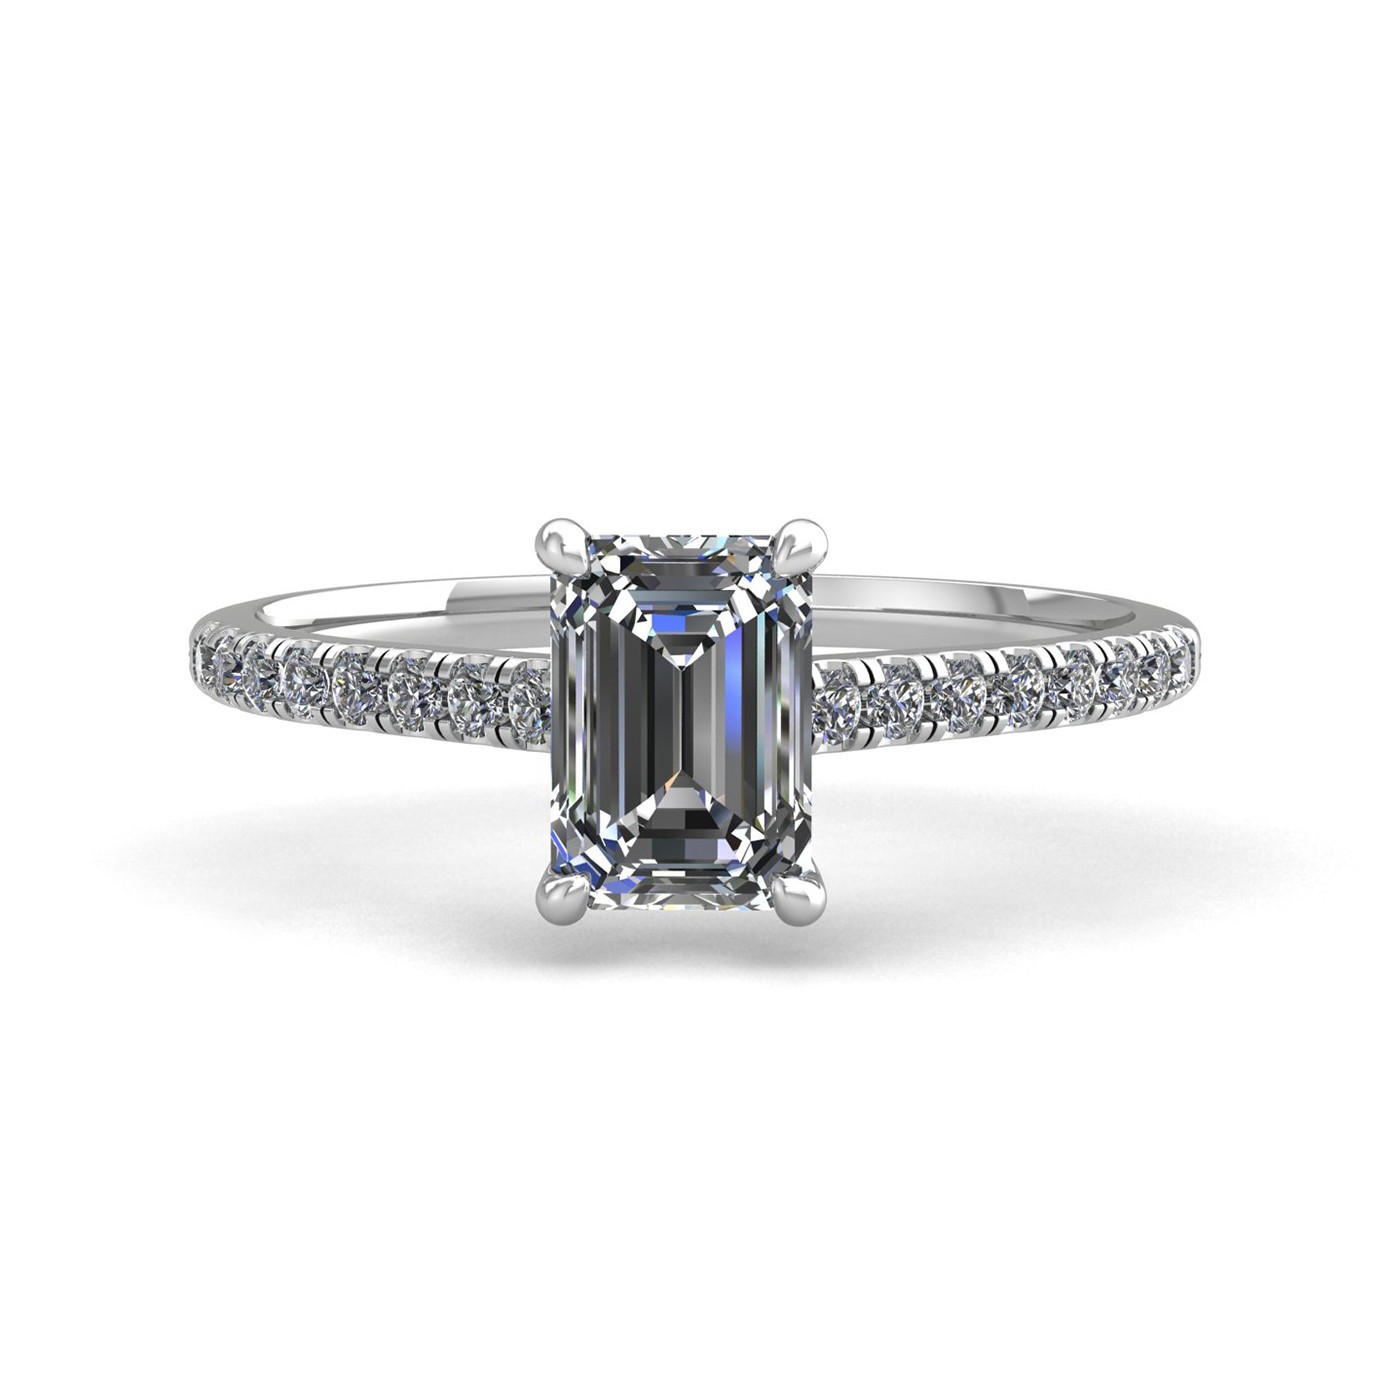 18k white gold 2.0ct 4 prongs emerald cut diamond engagement ring with whisper thin pavÉ set band Photos & images